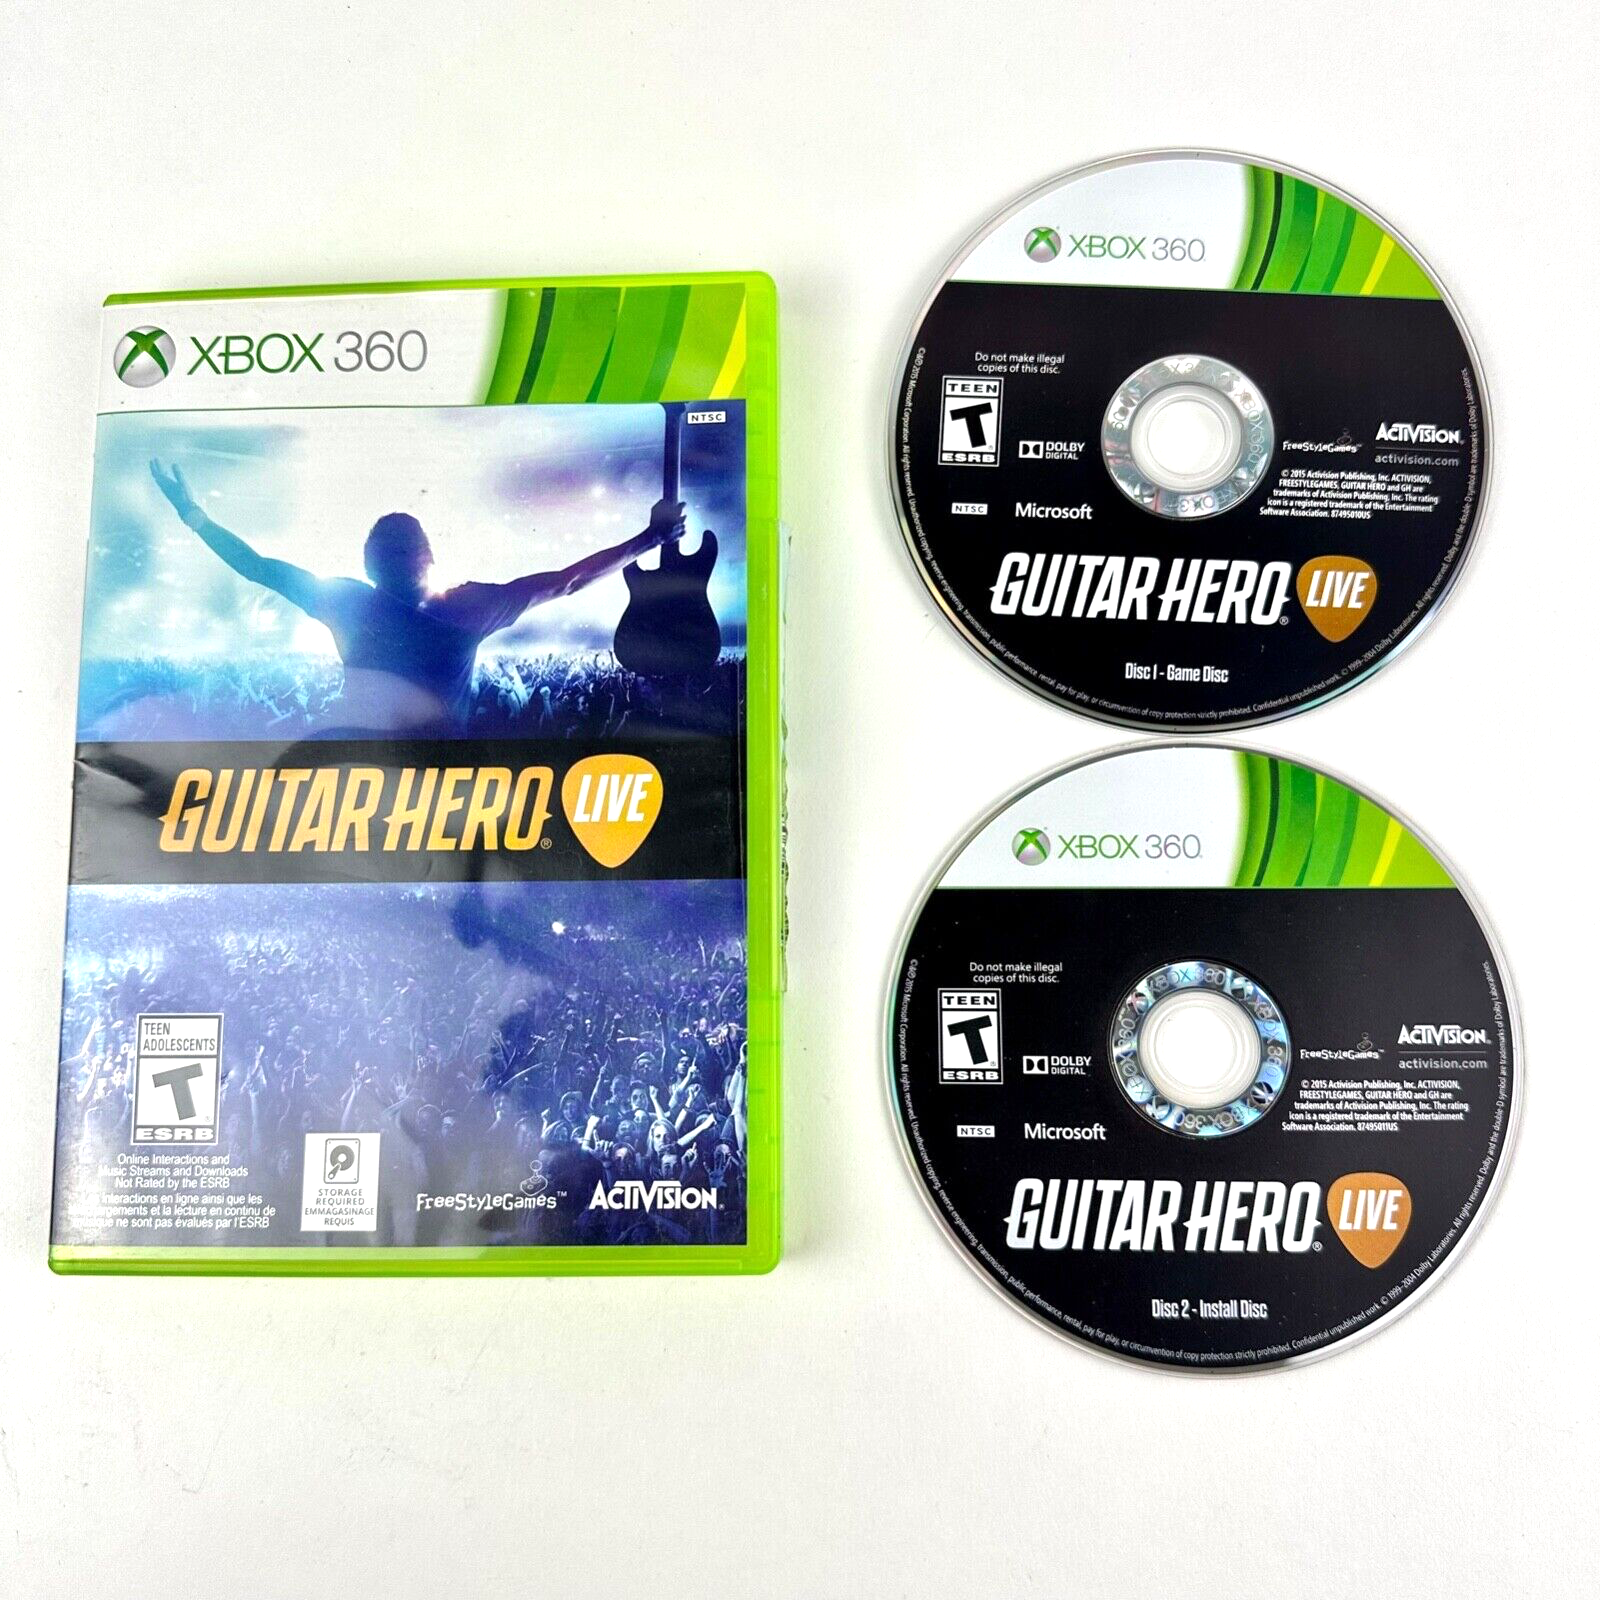 Primary image for Genuine Microsoft XBOX 360 Guitar Hero Live 2 Disc Video Game "T" 2004